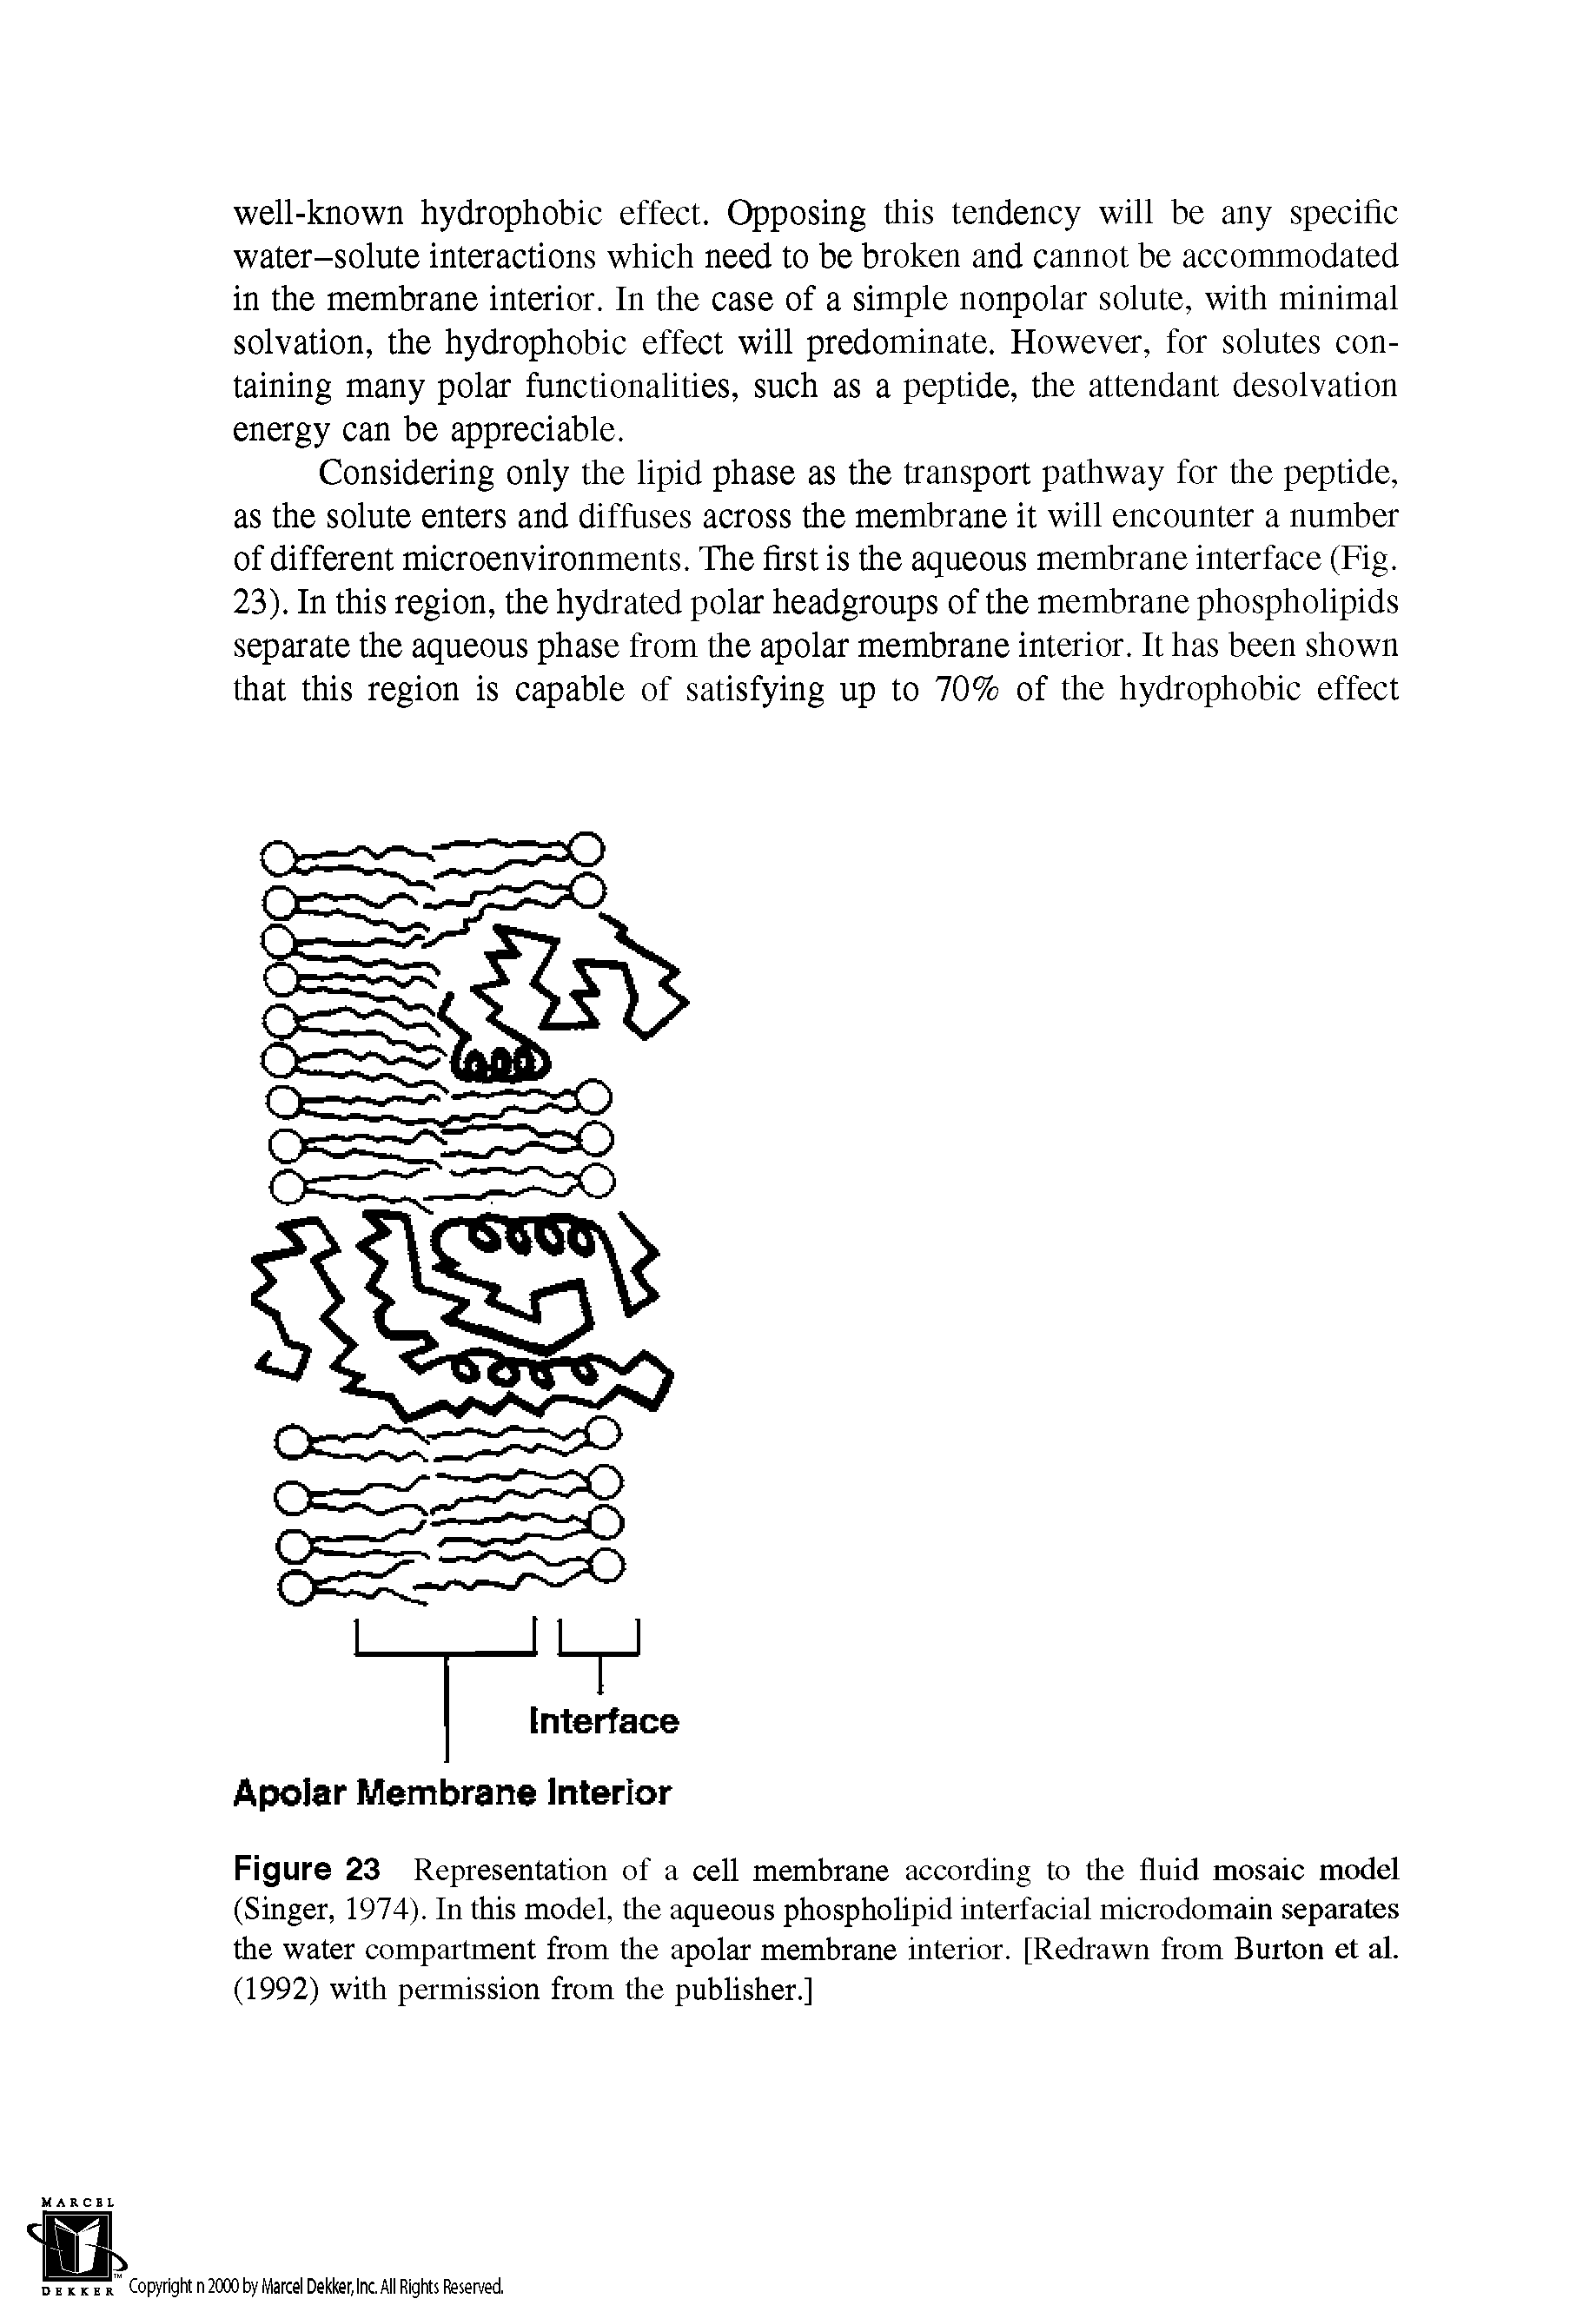 Figure 23 Representation of a cell membrane according to the fluid mosaic model (Singer, 1974). In this model, the aqueous phospholipid interfacial microdomain separates the water compartment from the apolar membrane interior. [Redrawn from Burton et al. (1992) with permission from the publisher.]...